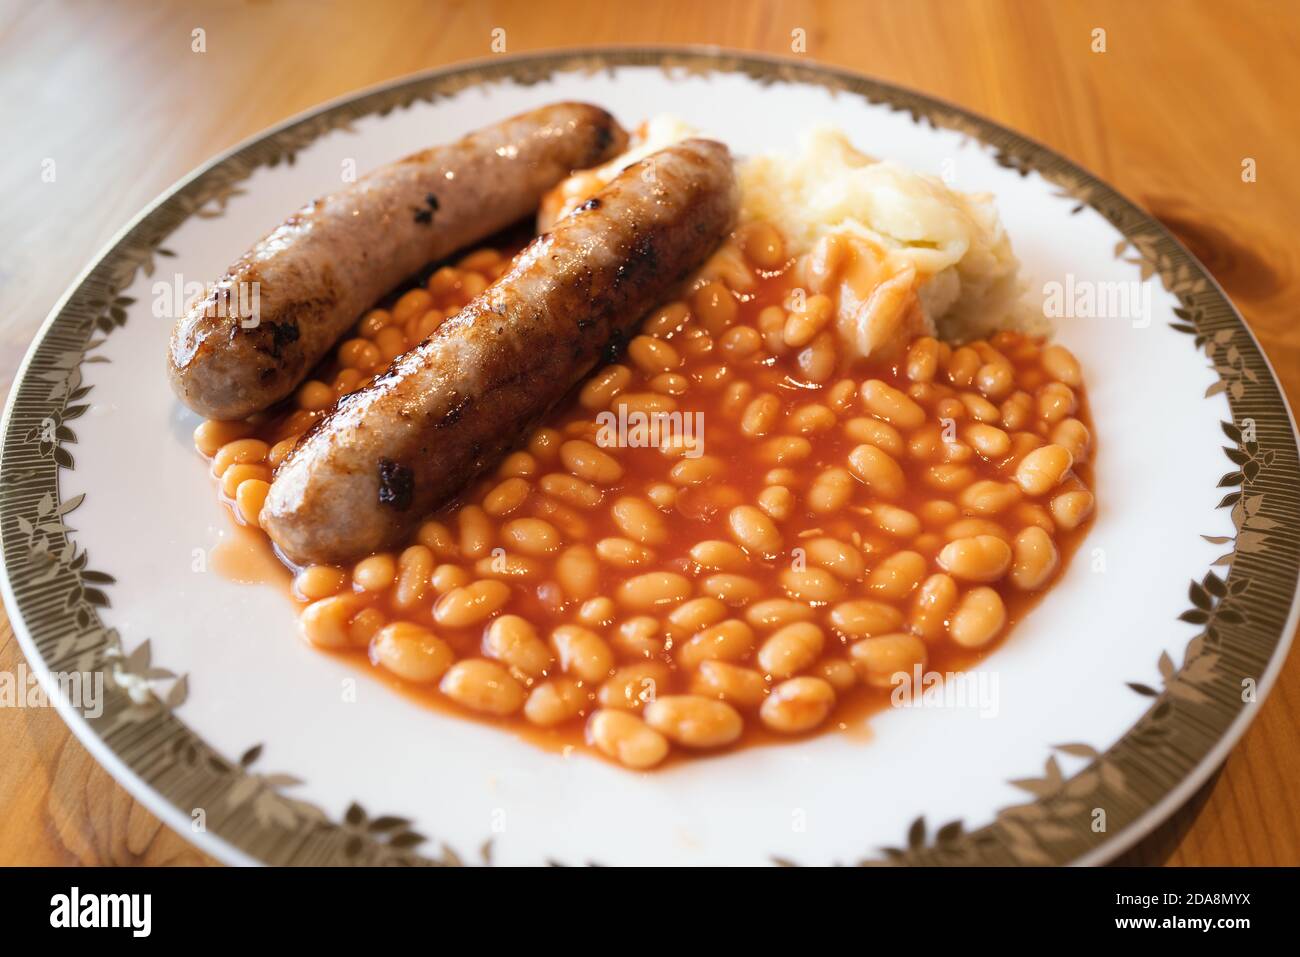 Two large fried sausages with baked beans and mashed potato on a white plate with a gold colour trim on a wooden table lit by window natural light. Stock Photo